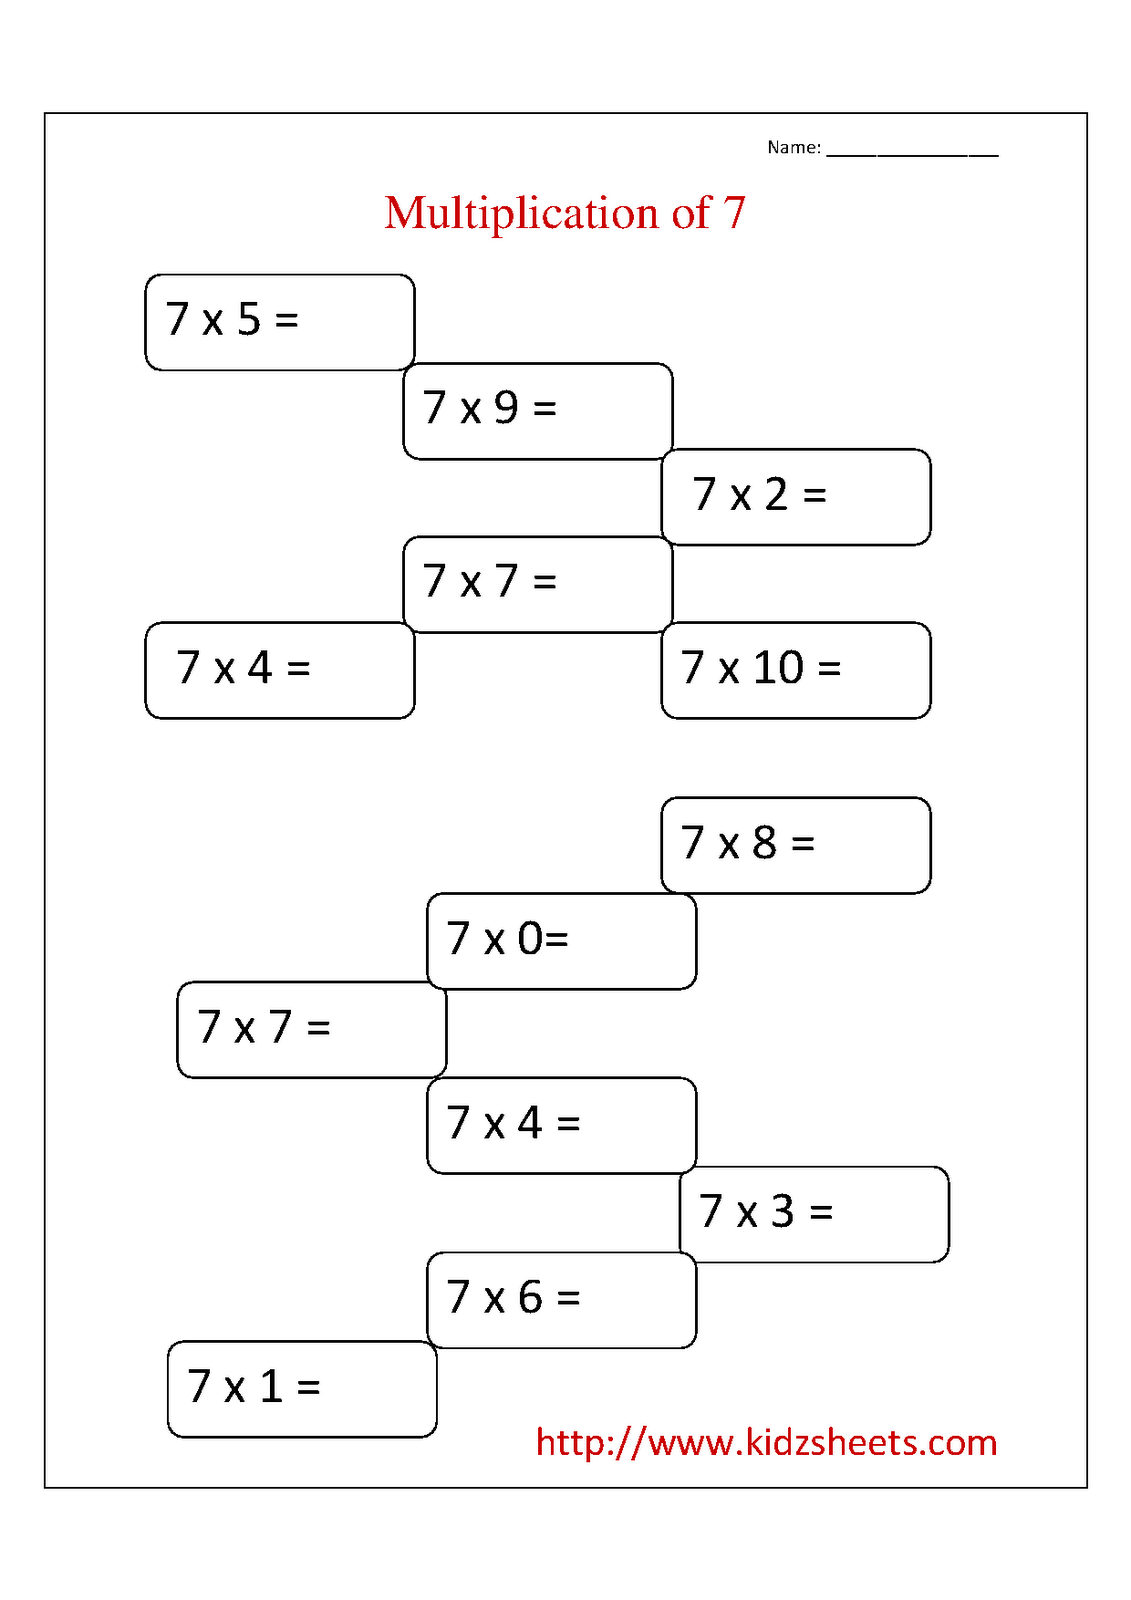 Multiplication Table for 2nd Grade Image